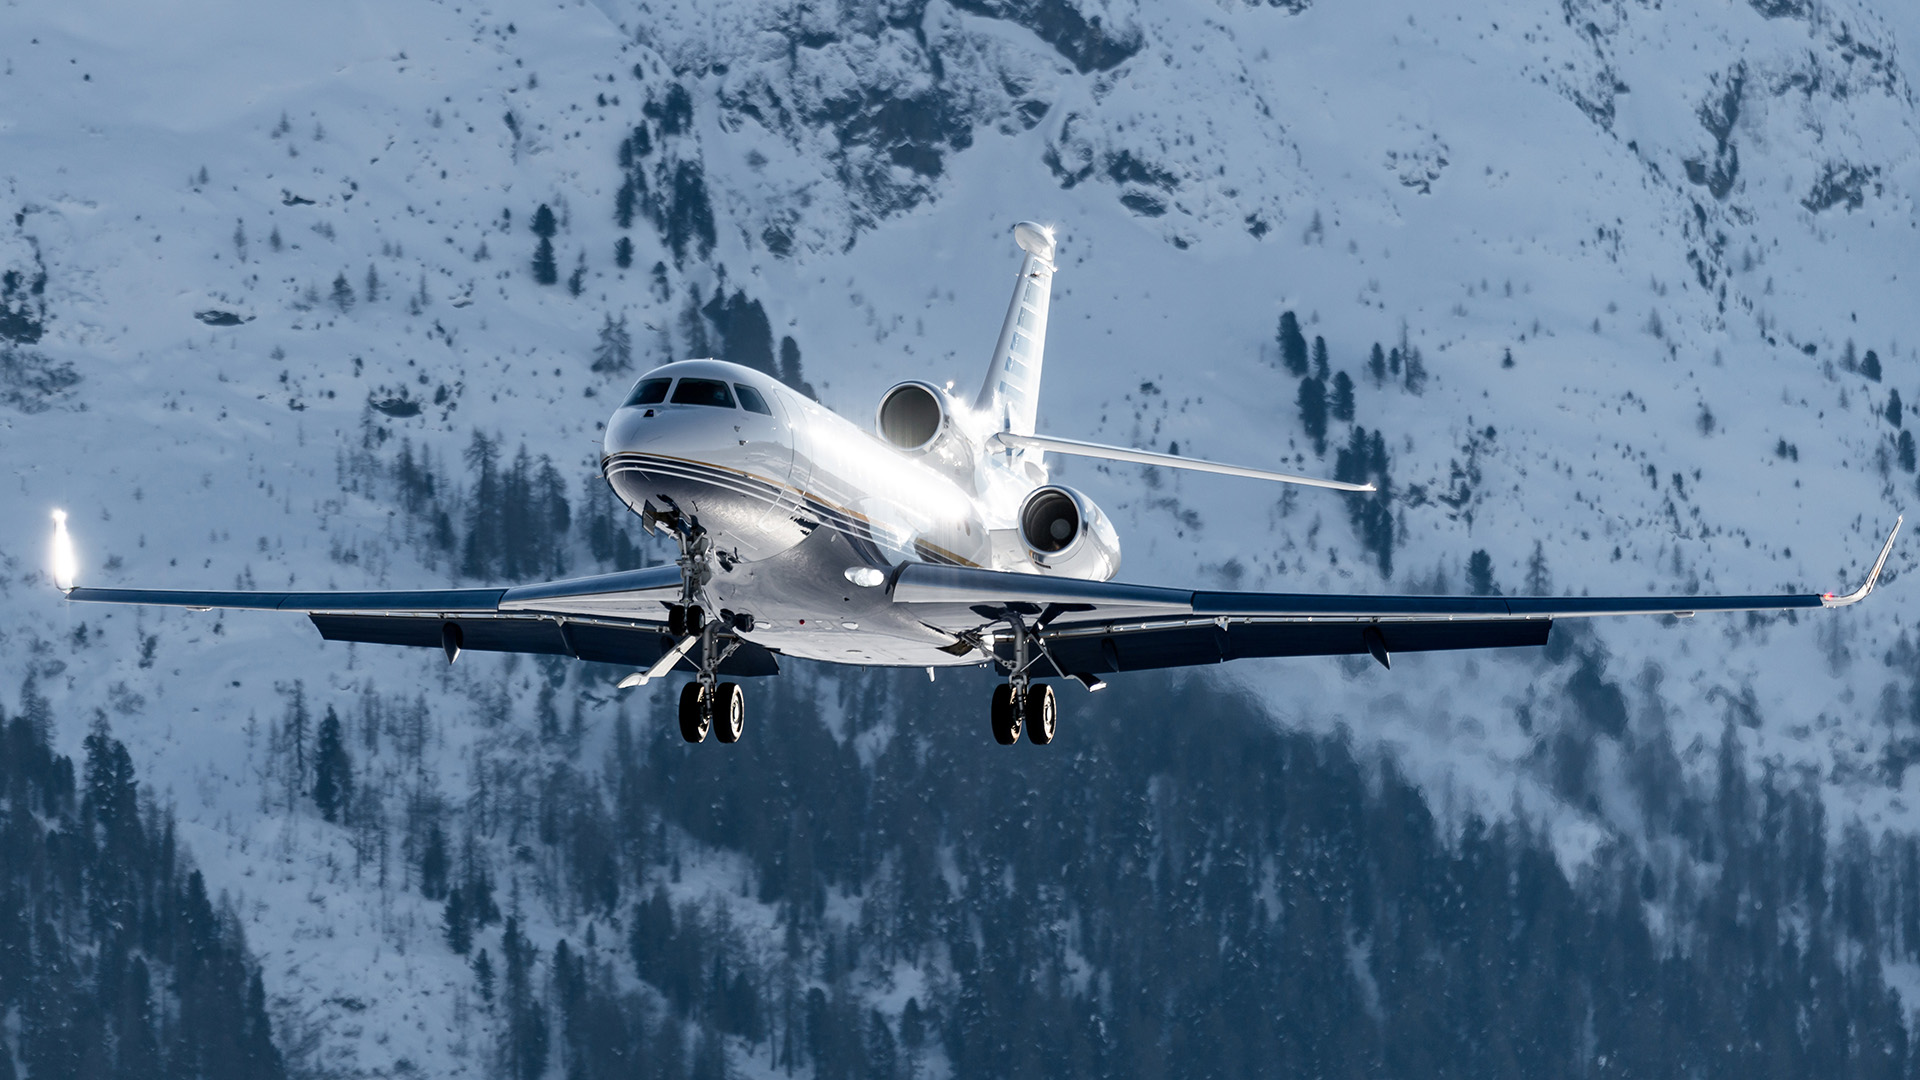 A three-engine private jet in flight with its wheels down, with a snowy, forested mountain behind it.